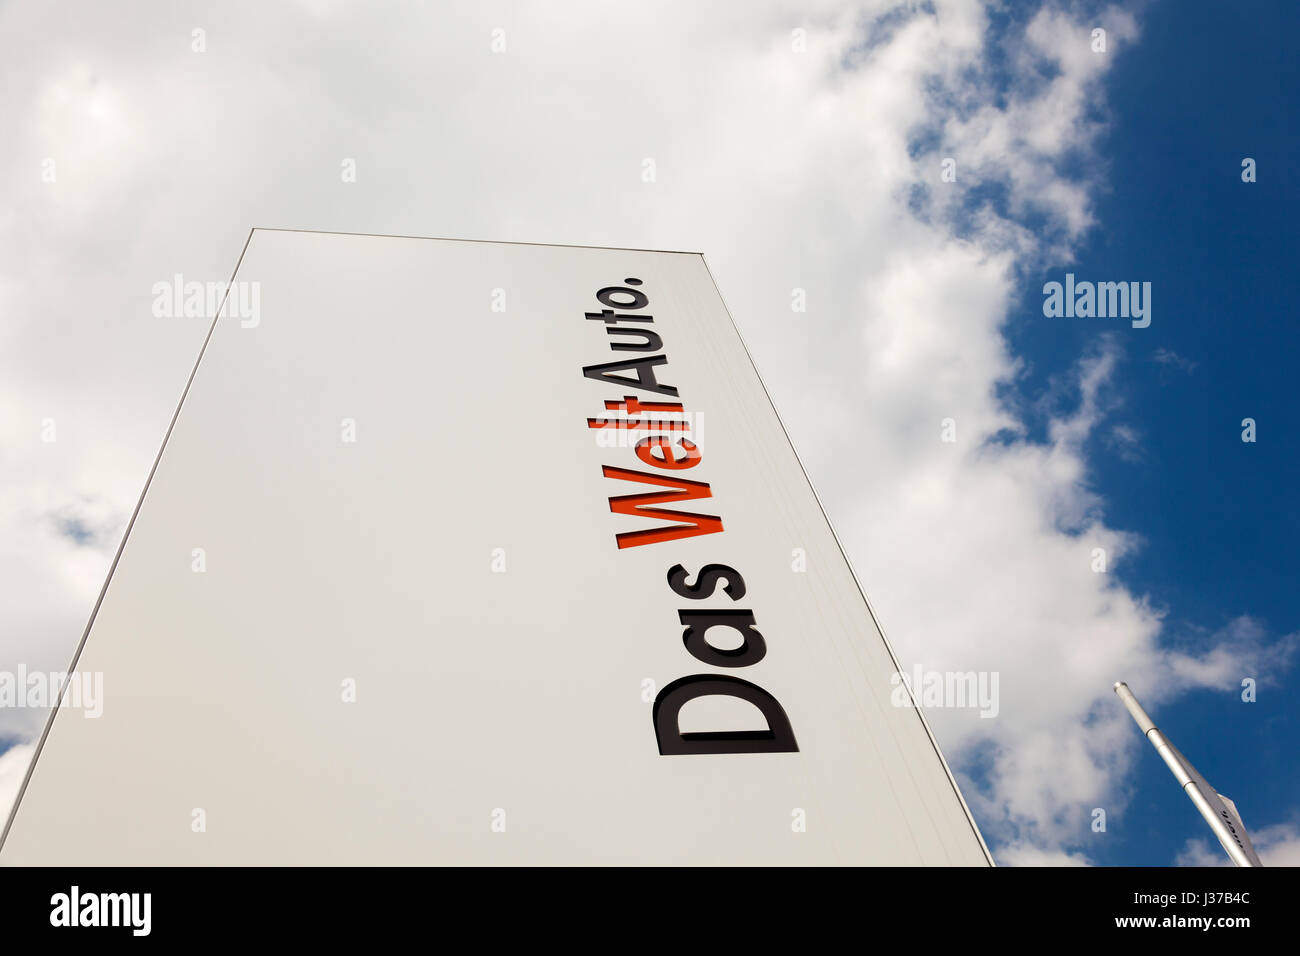 Frankfurt, Germany - March 30, 2017: Das WeltAuto advertising slogan from Volkswagen at a dealership. Das WeltAuto translates to the world car Stock Photo